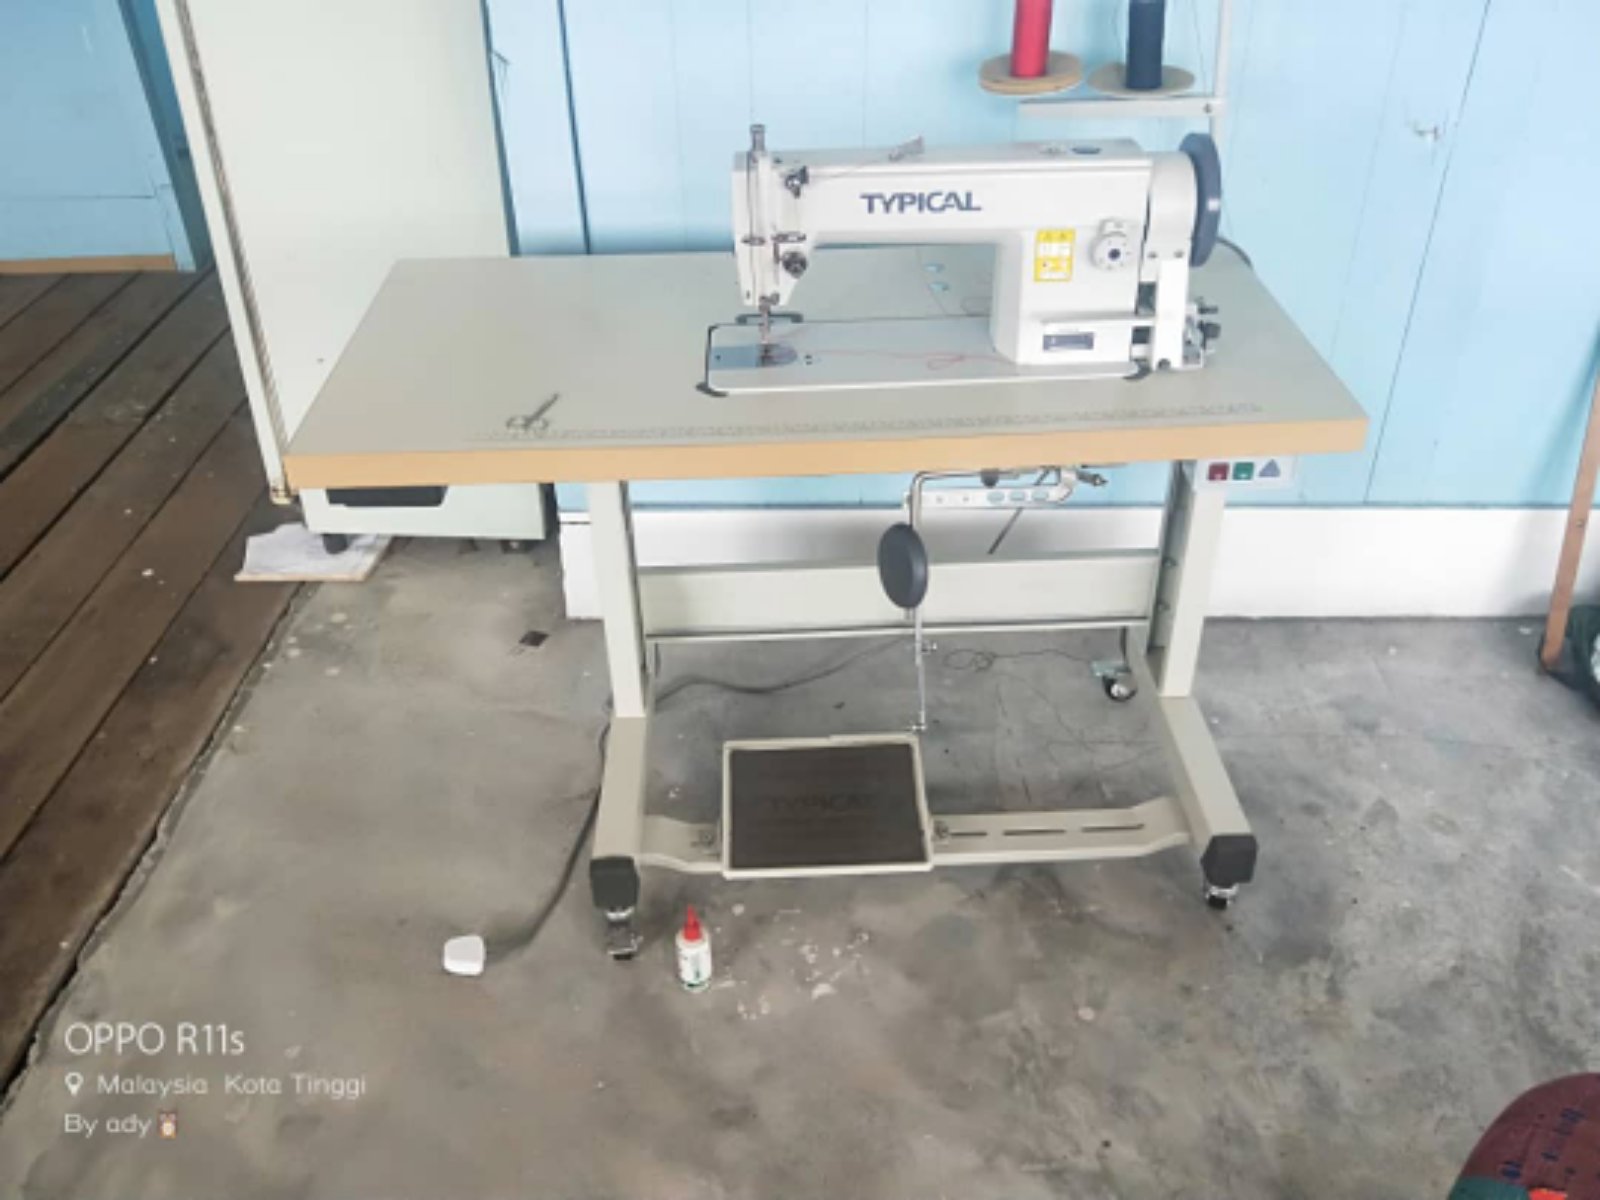 Second Typical Walking foot Sewing Machine 